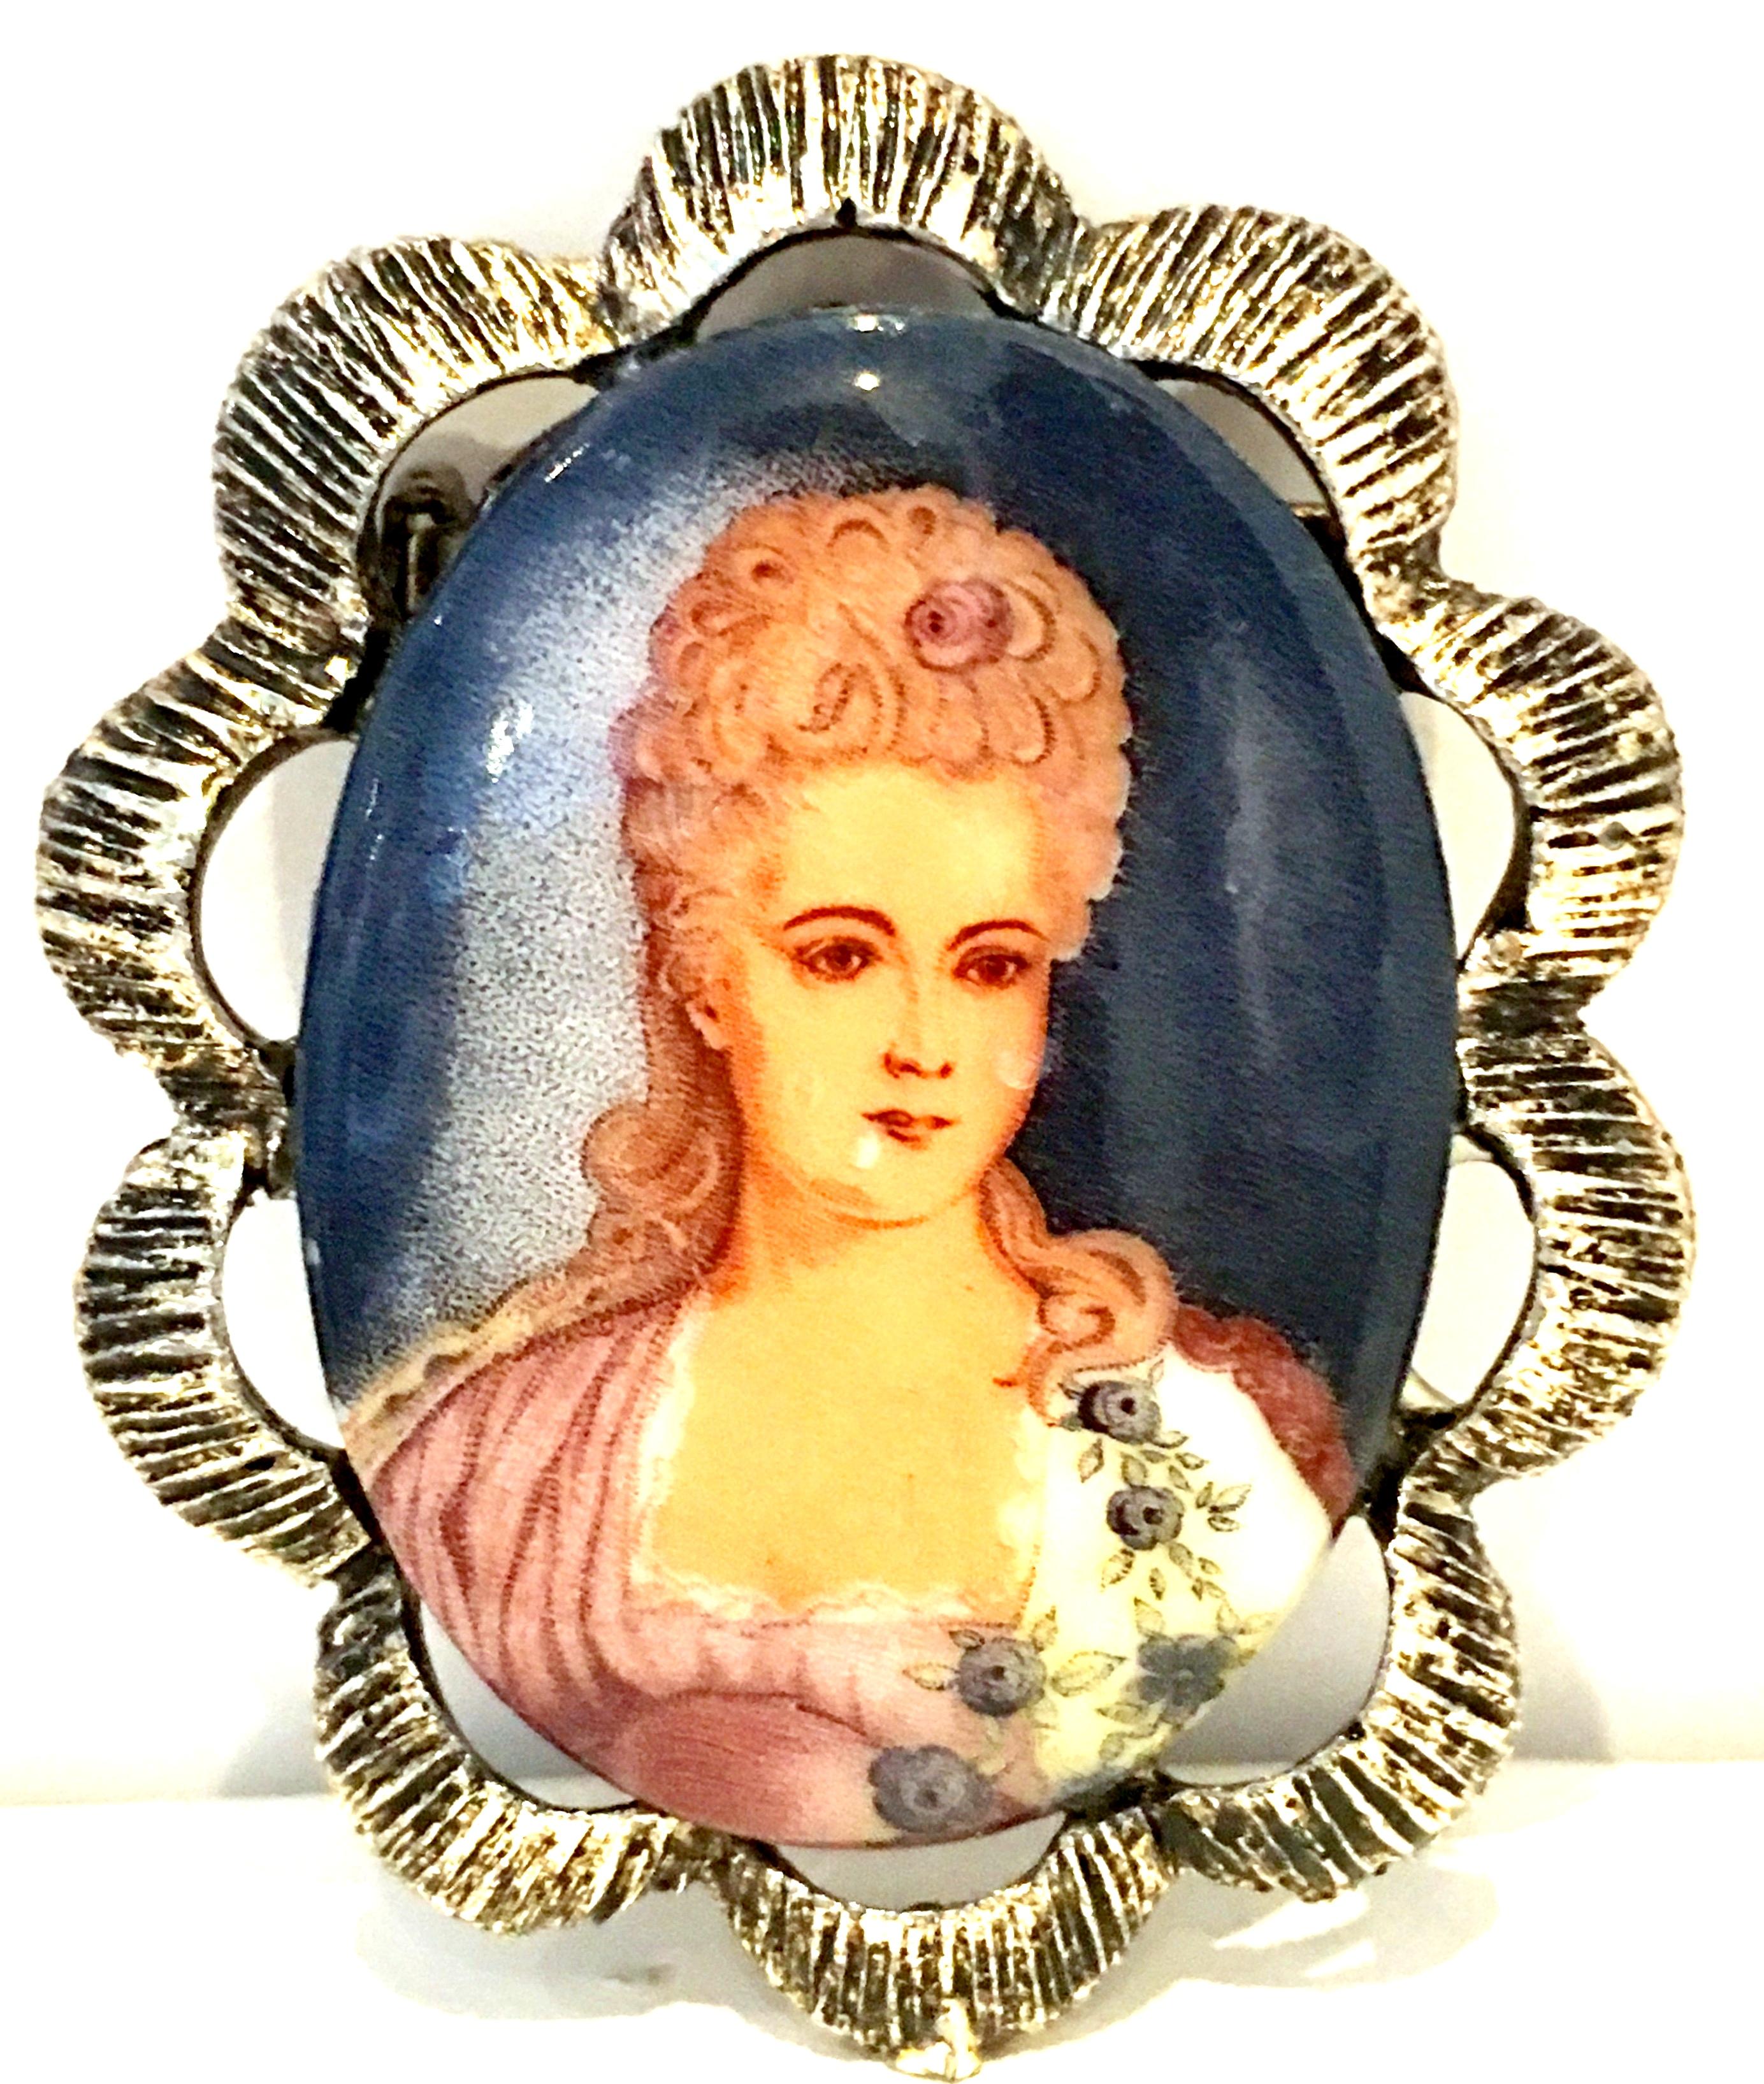 20th Century Florenza Style Silver Plate Hand Painted Portrait Brooch. This Victorian style brooch features a silver plate ornate frame with a hand painted ceramic female portrait.

